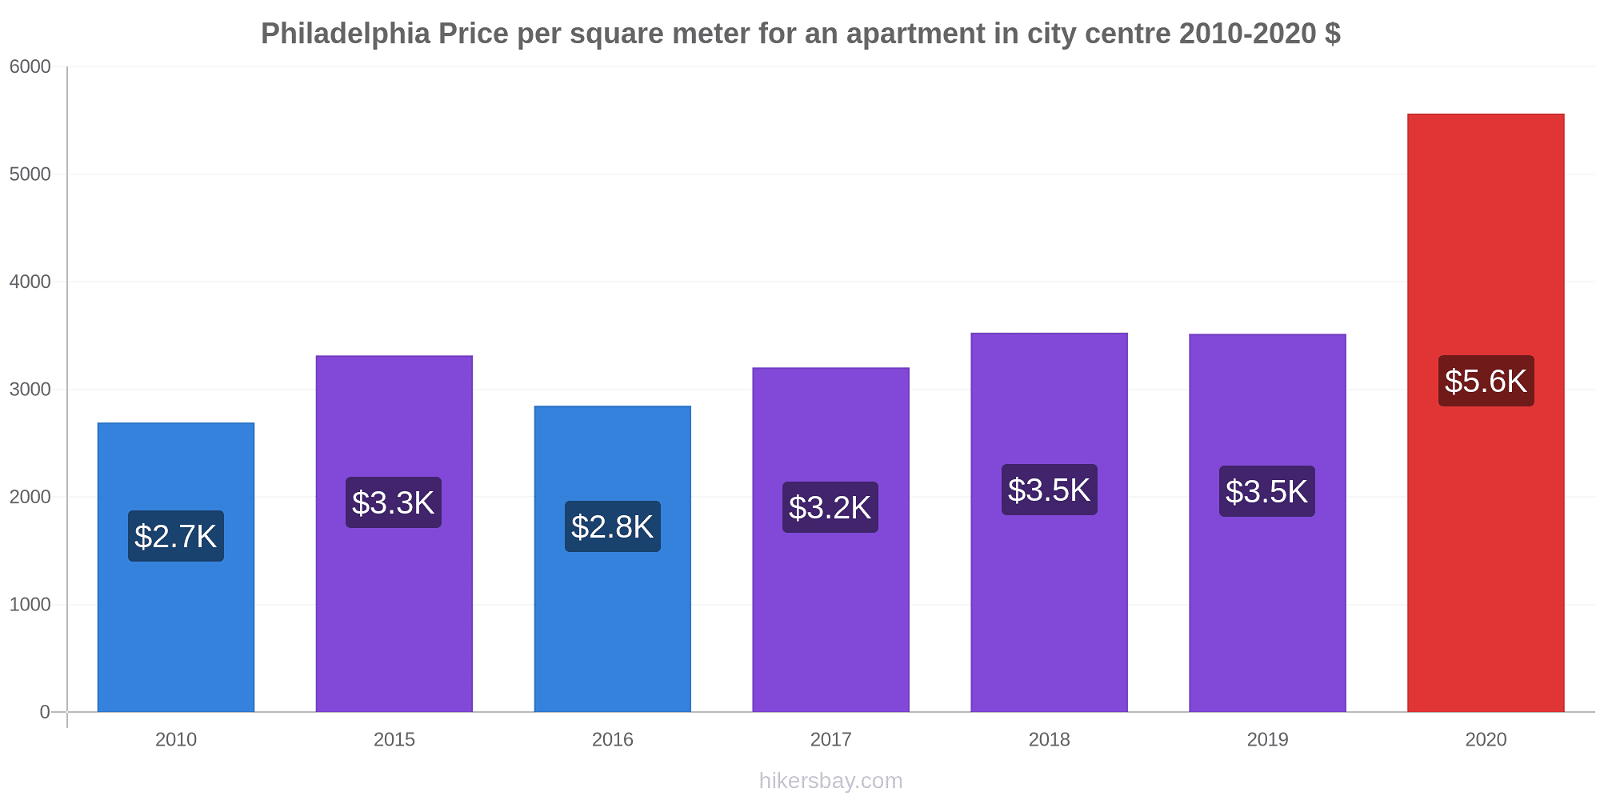 Philadelphia price changes Price per square meter for an apartment in city centre hikersbay.com